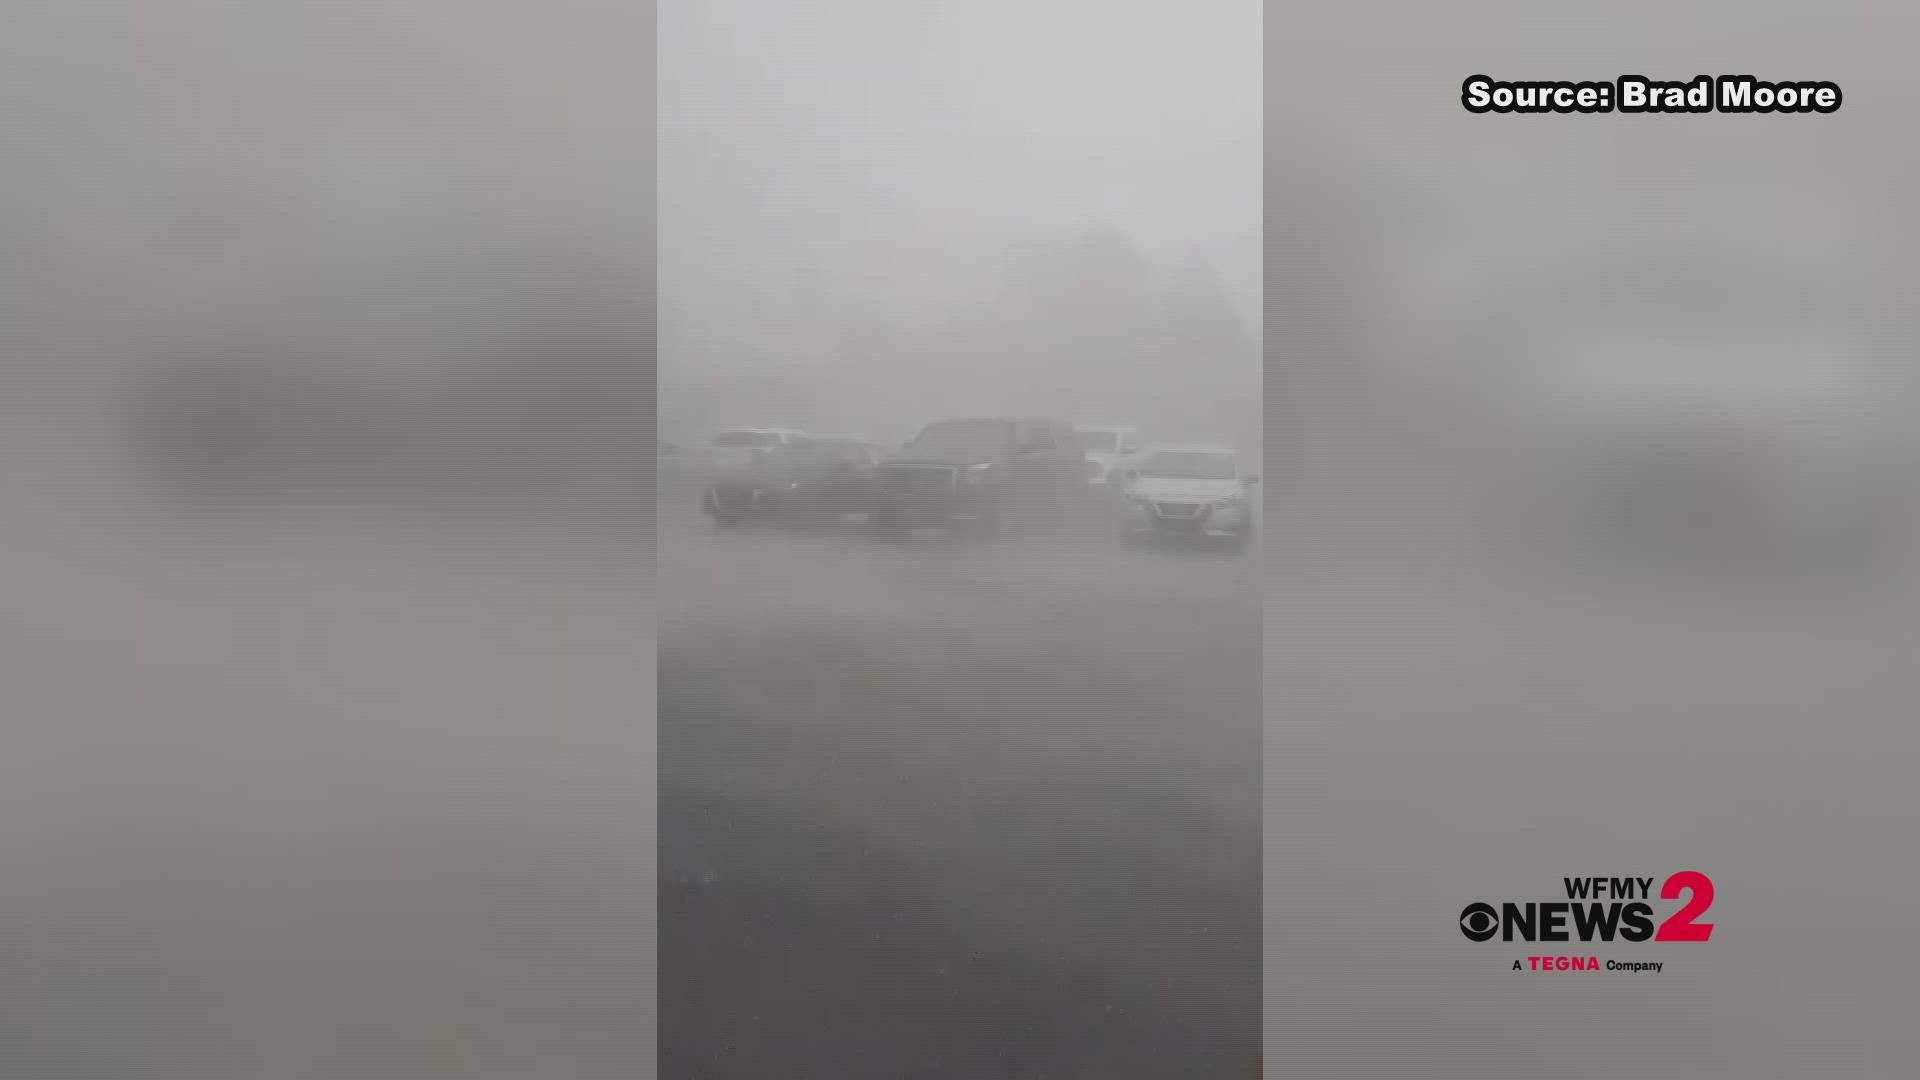 Brad Moore in Reidsville shared this video with WFMY News 2 of high winds and rain during Friday afternoon's storm.